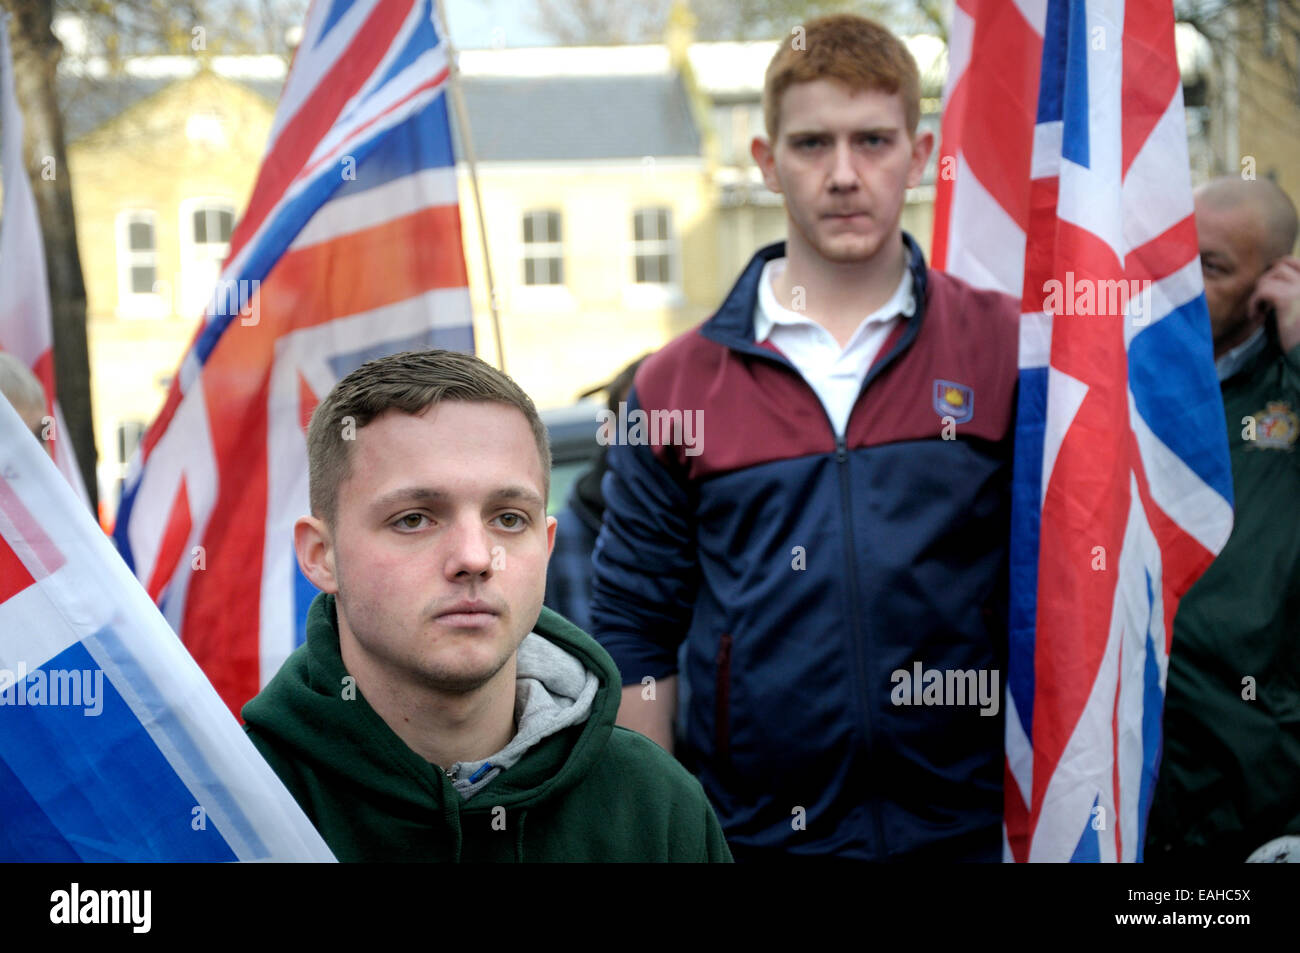 Rochester, UK. 15th November, 2014. Approximately 25-30 Britain First supporters including Paul Golding and their Parliamentary Candidate Jayda Fransen march down Rochester High Street meeting many more counter protesters. Stock Photo